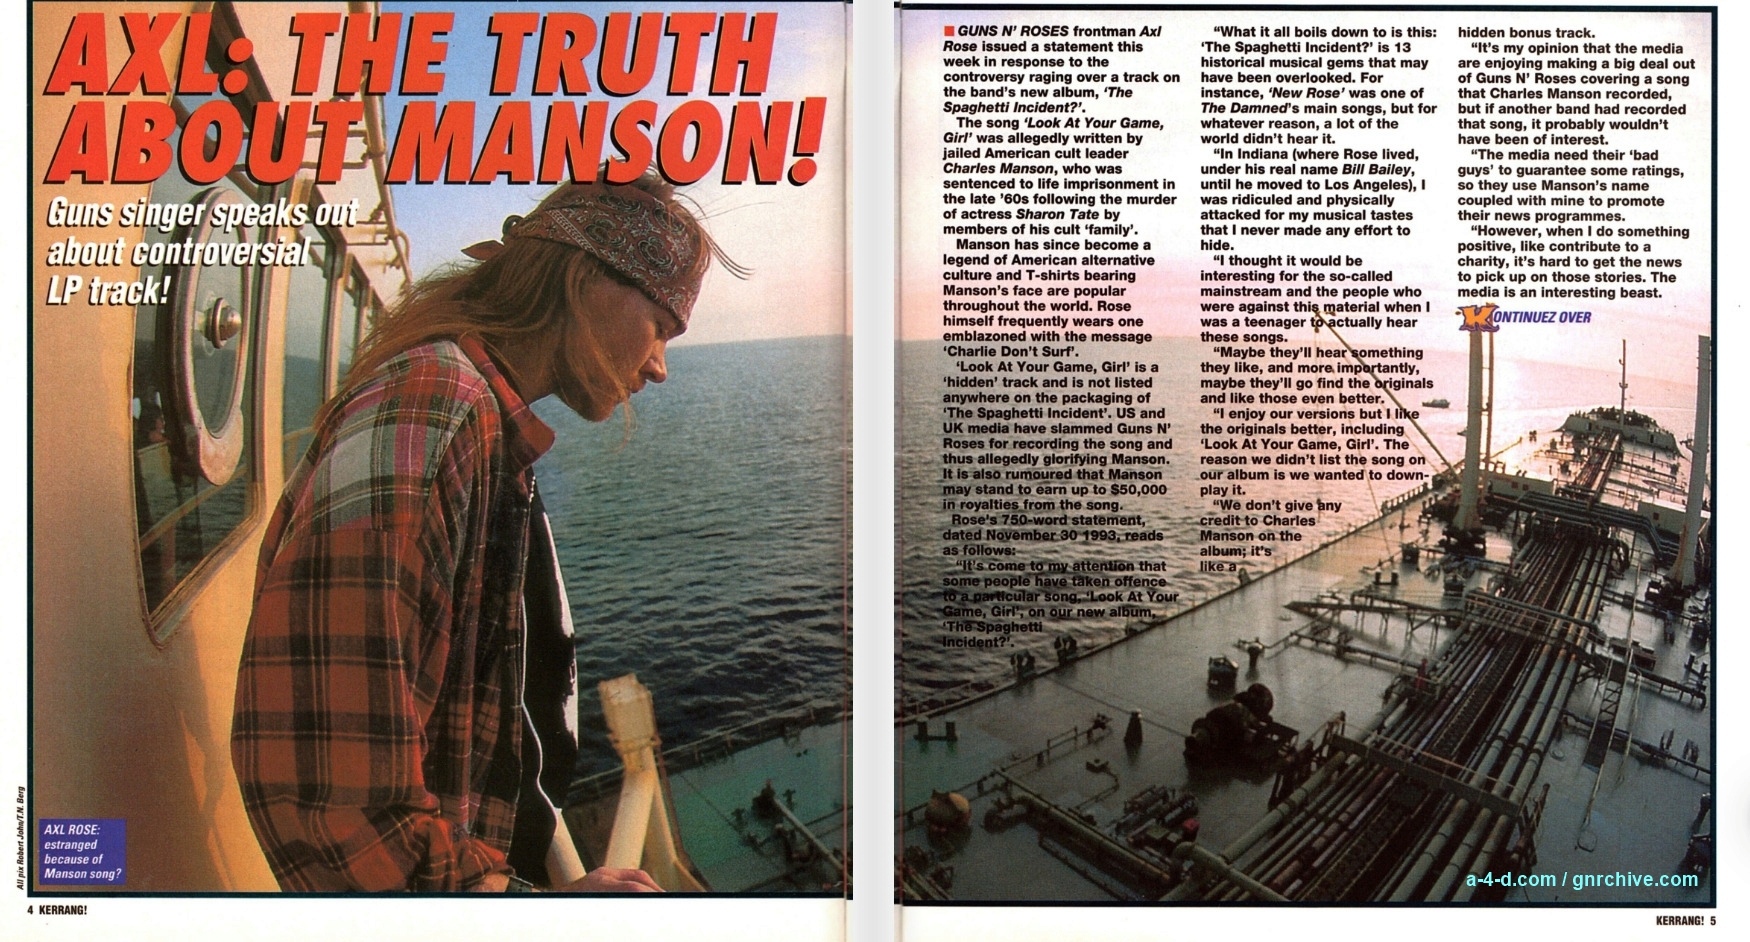 1993.12.11 - Kerrang! - Axl: The Truth About Manson 1993_187